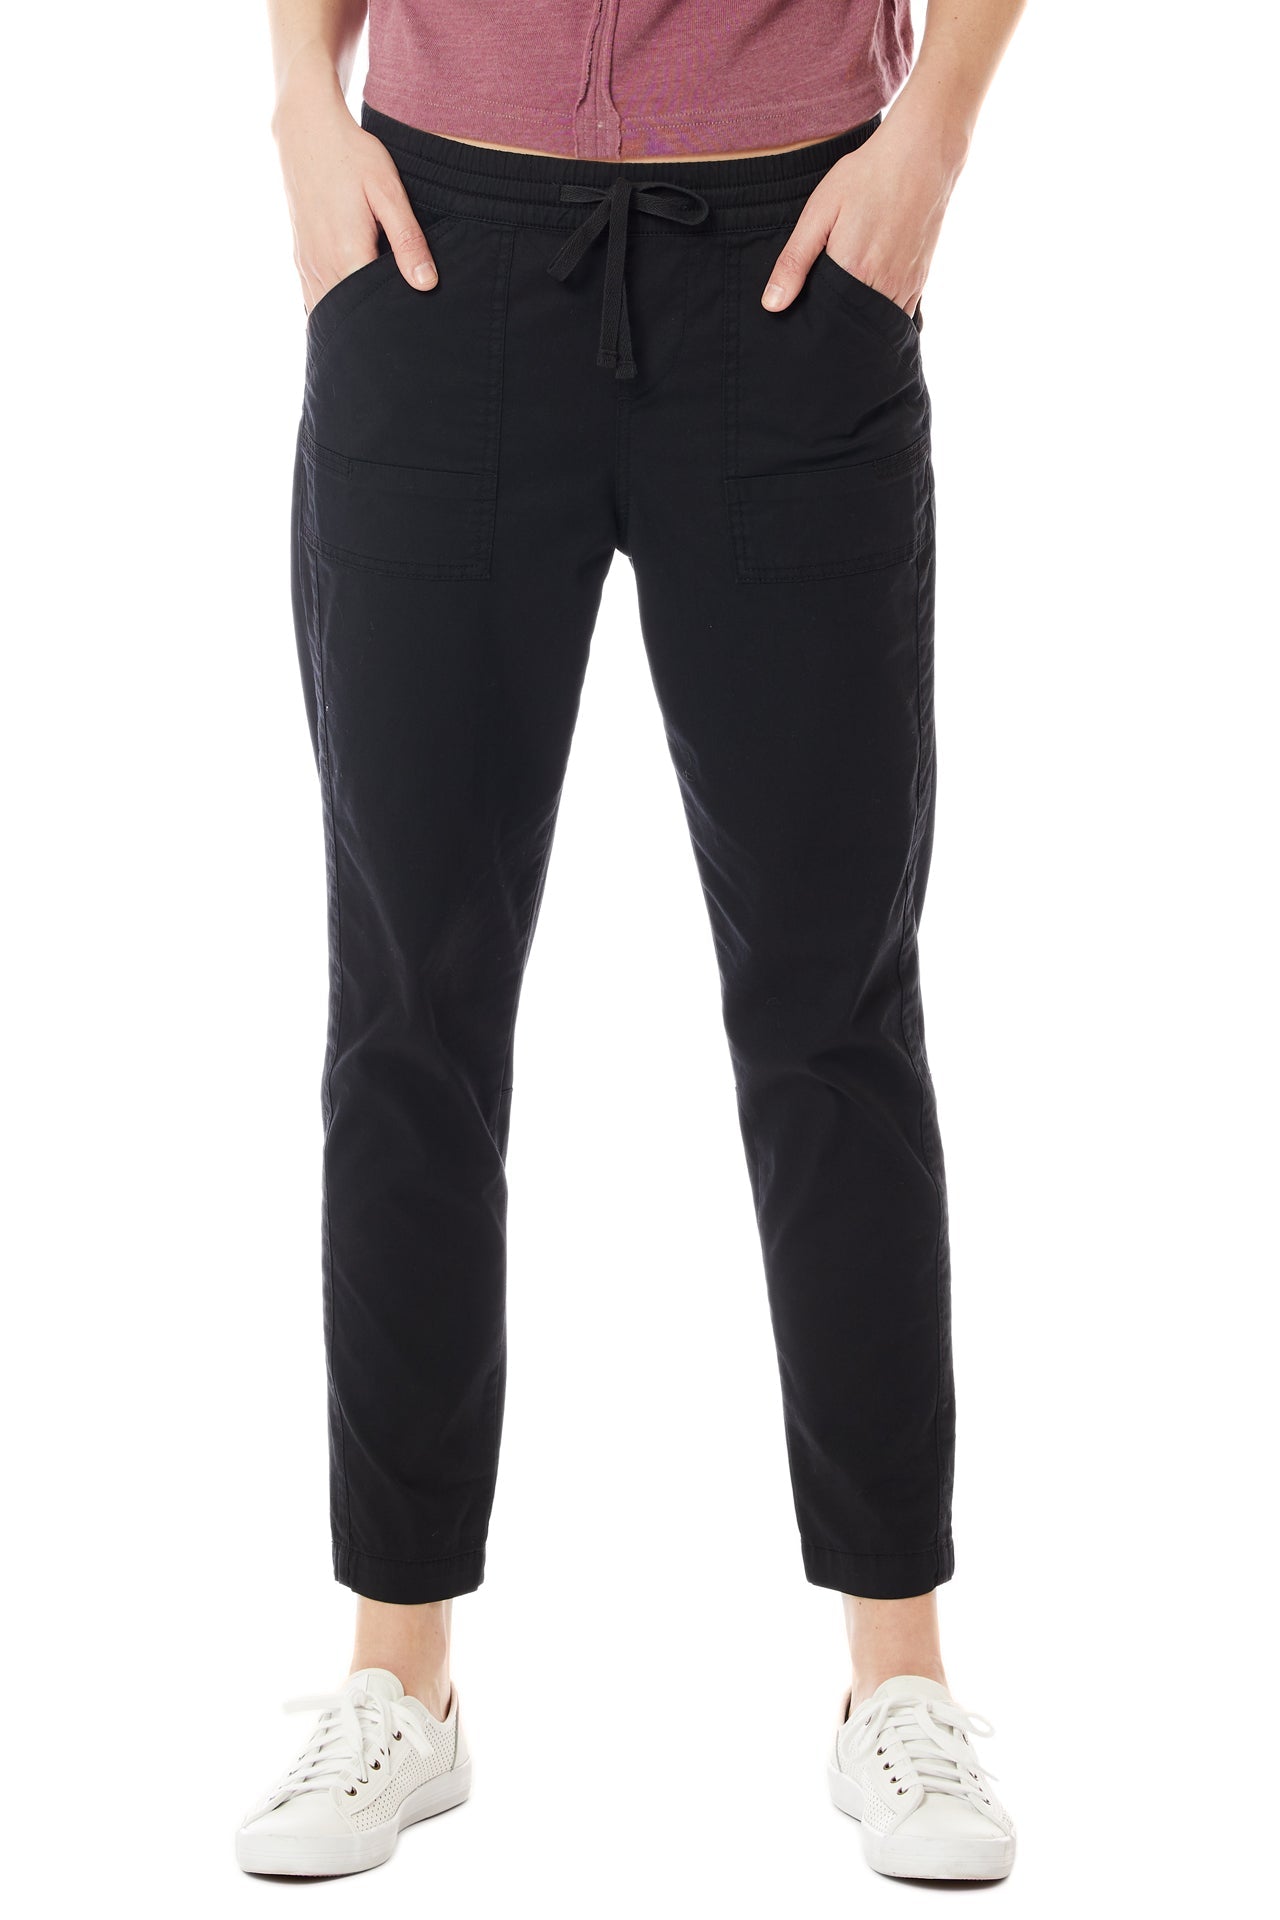 Maryanne Ankle Pants - Women's Stylish and Comfortable